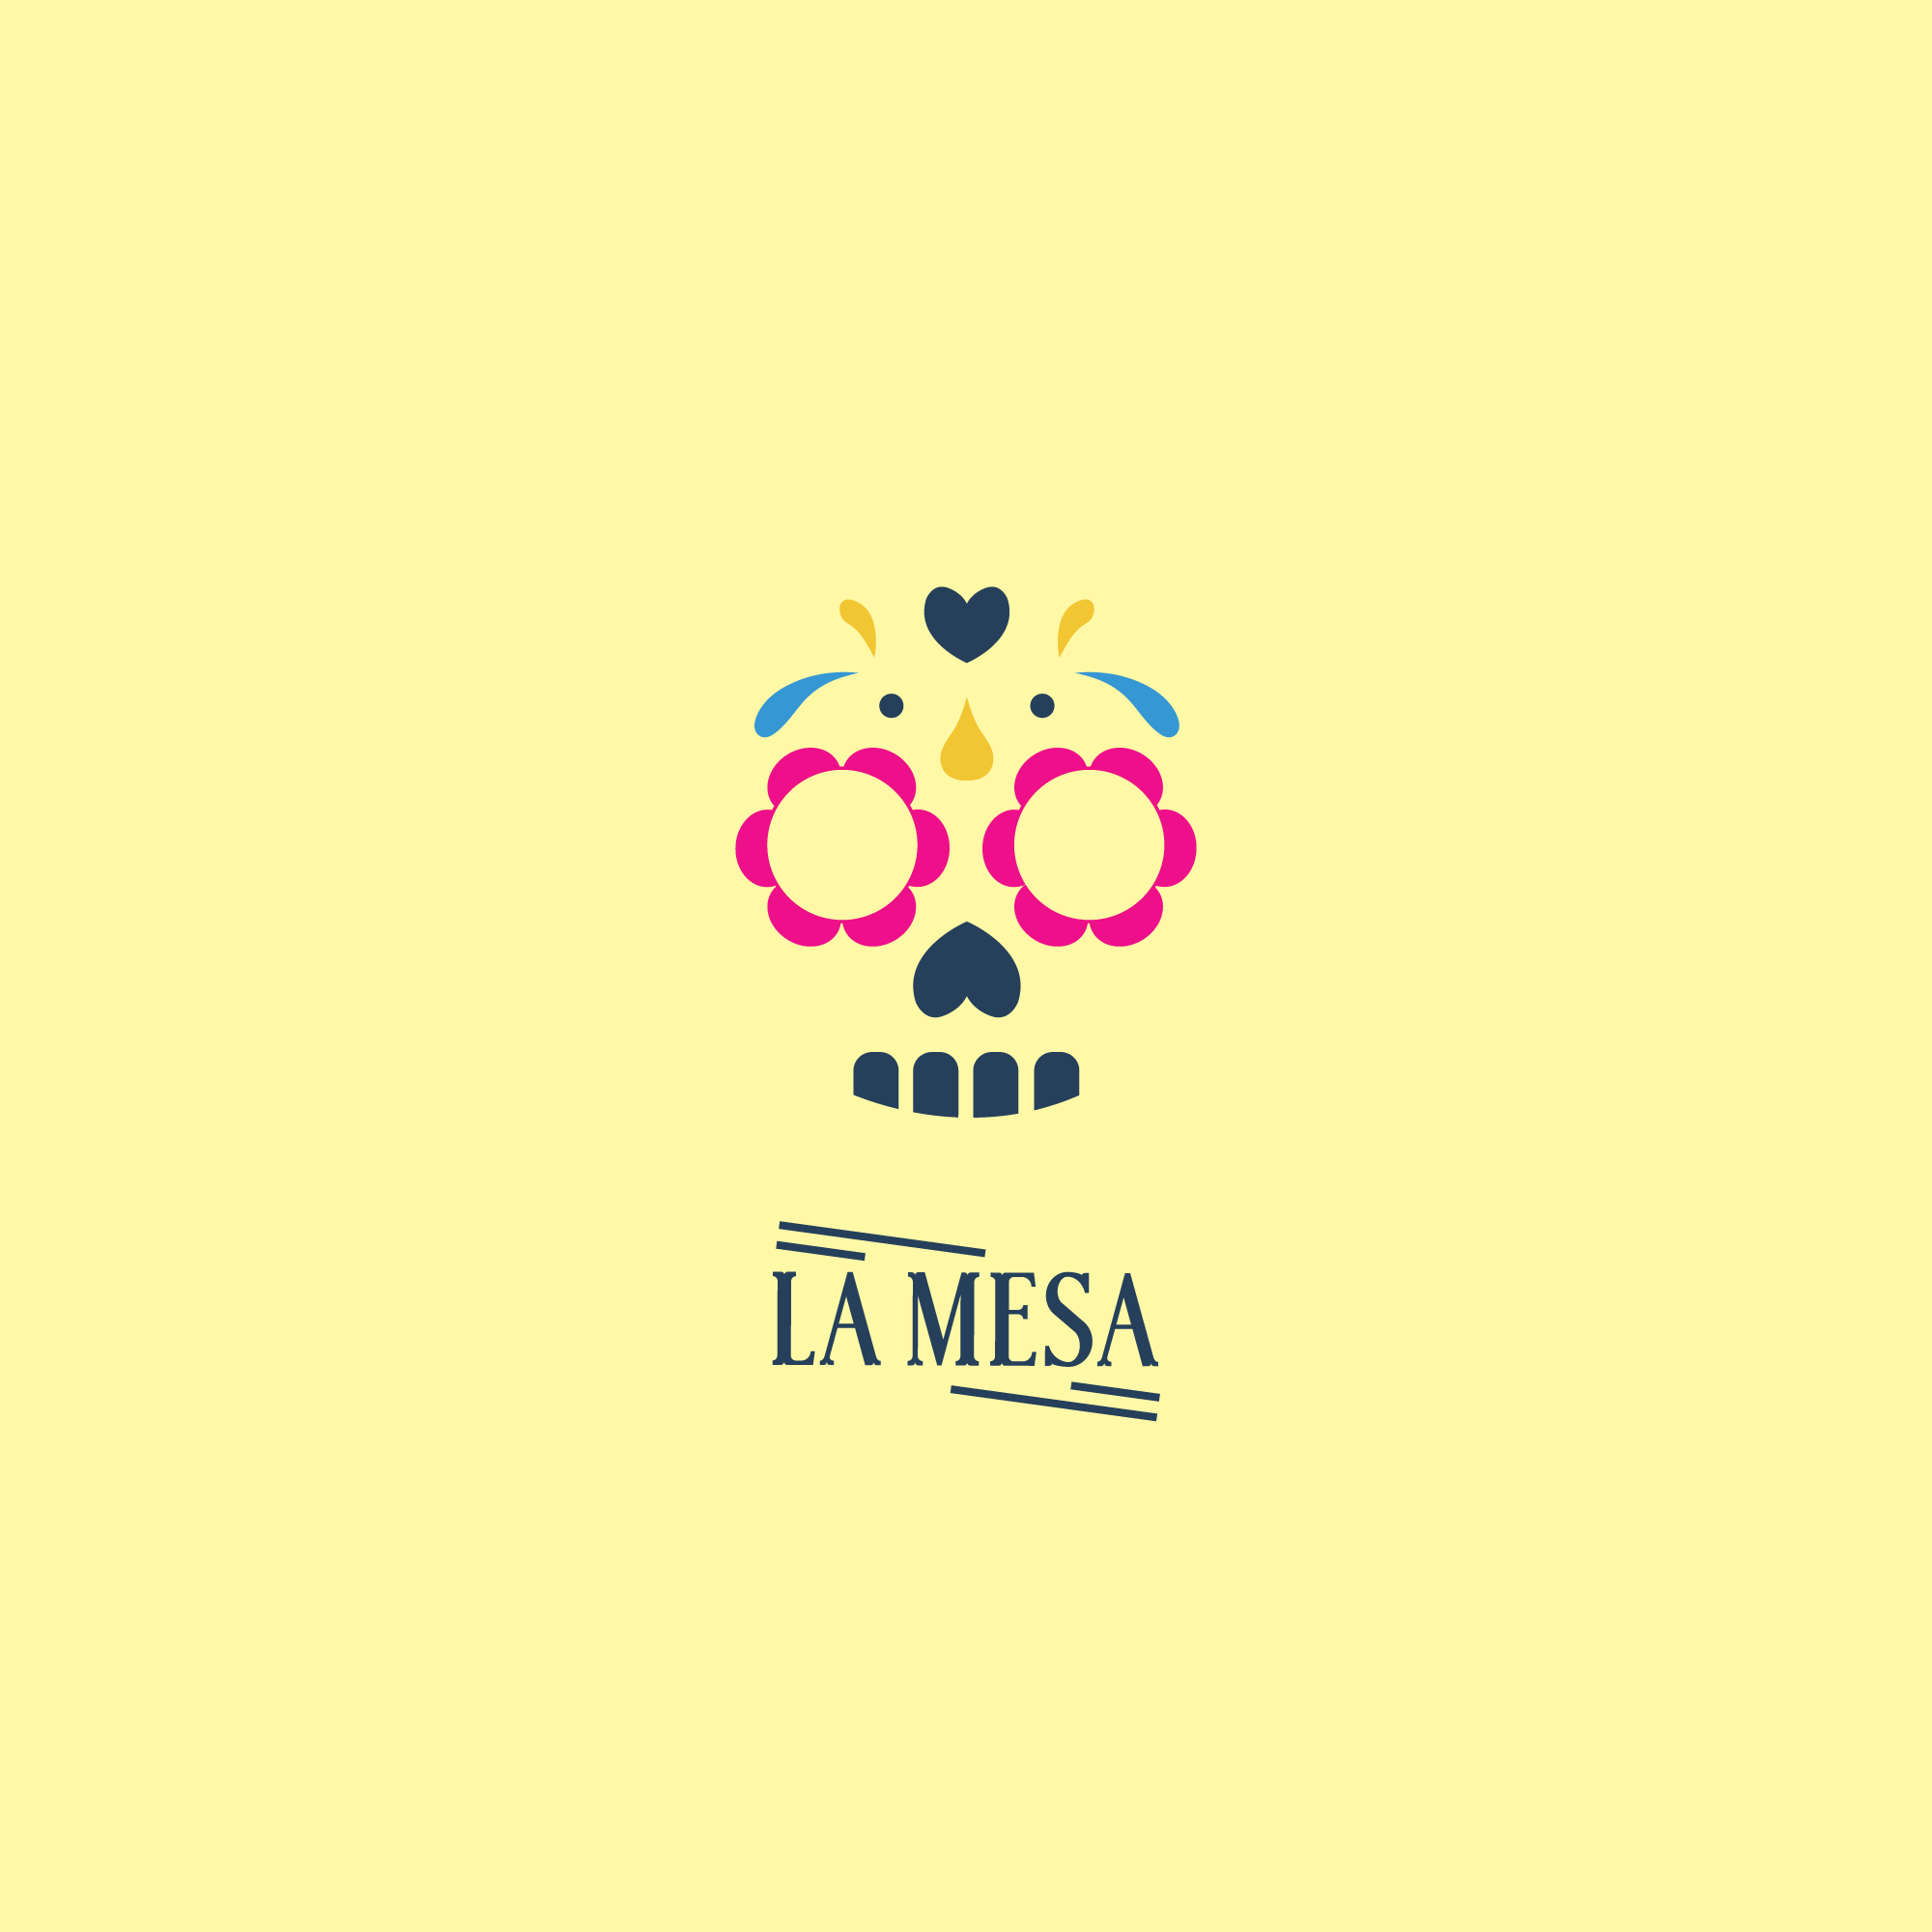 Mexican Restaurant Logo - Mexican Restaurant Logo Mesa Happy Day of the Dead Everyone